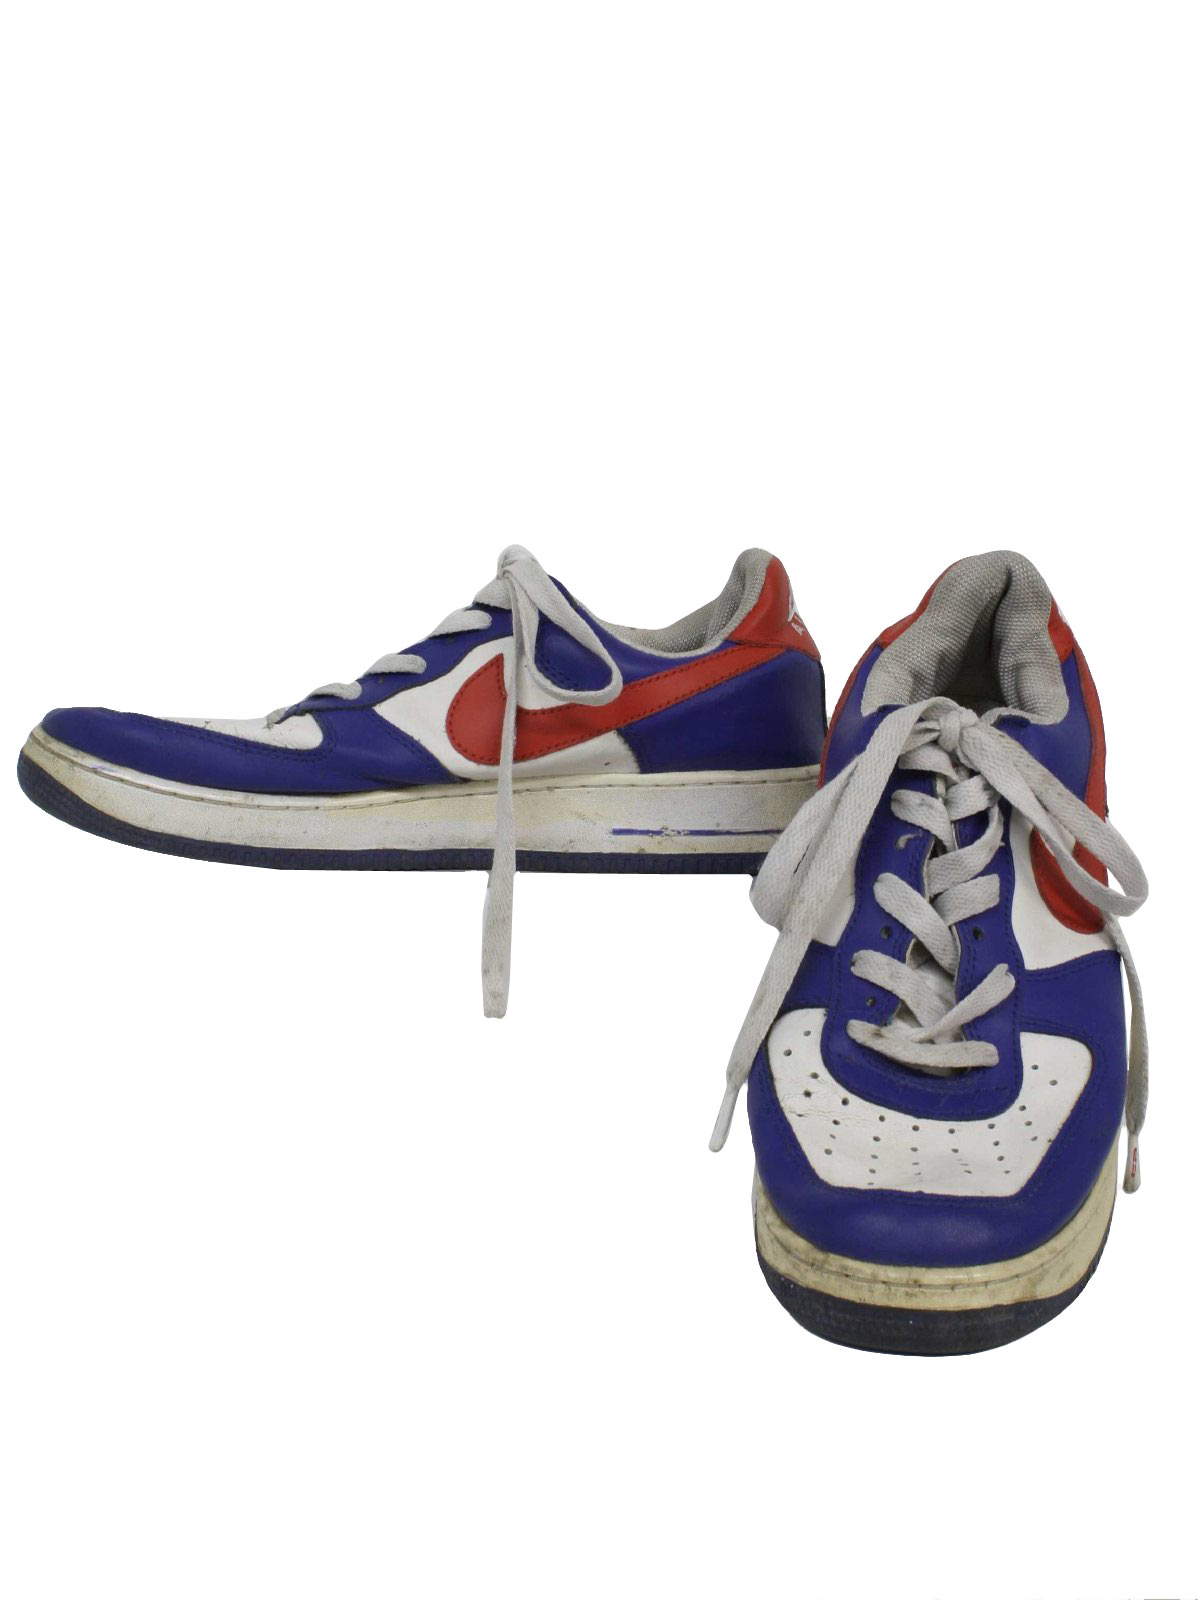 Nike Air Force 1 Nineties Vintage Shoes: 90s Air Force 1- Mens blue, white and red flat bottom classic old school tennis shoes with mesh dot upper bridge -AF 1